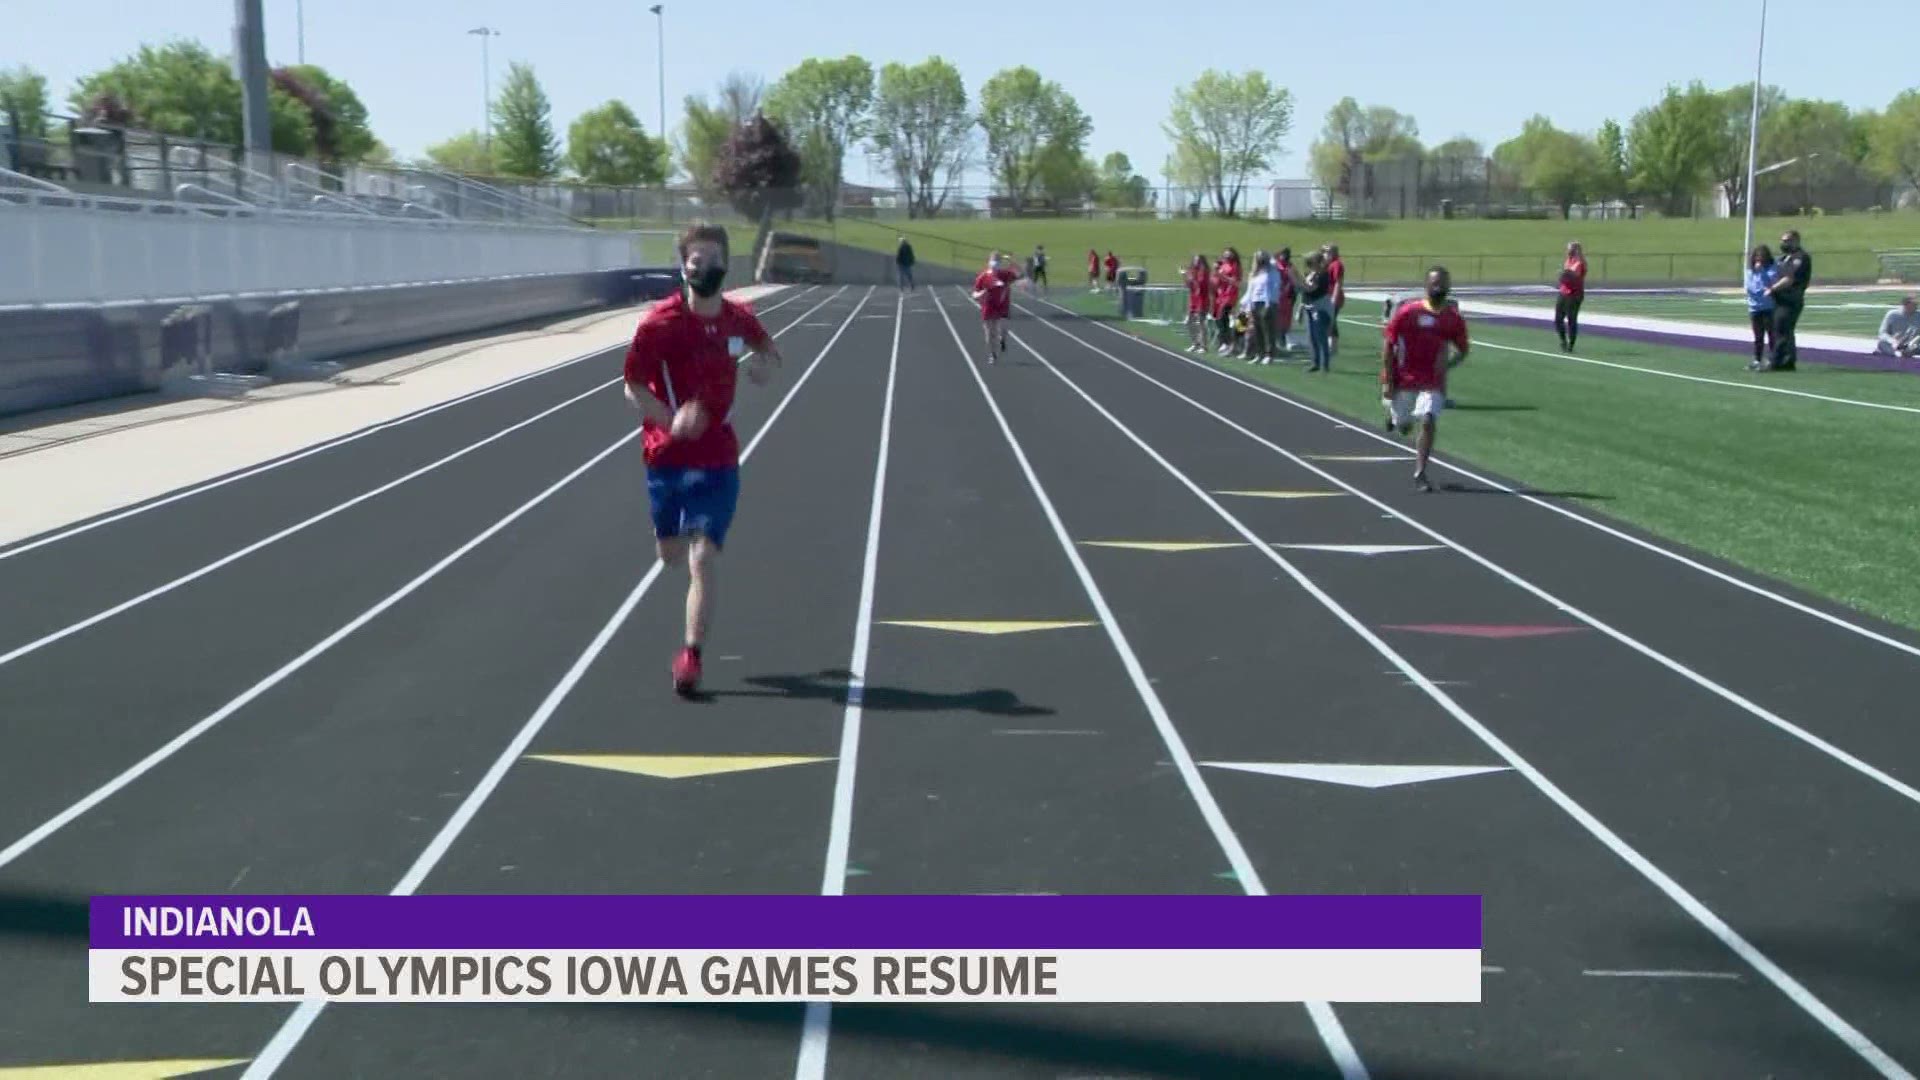 For the first time in 15 months, athletes with Special Olympics Iowa were able to take to the field. Literally.